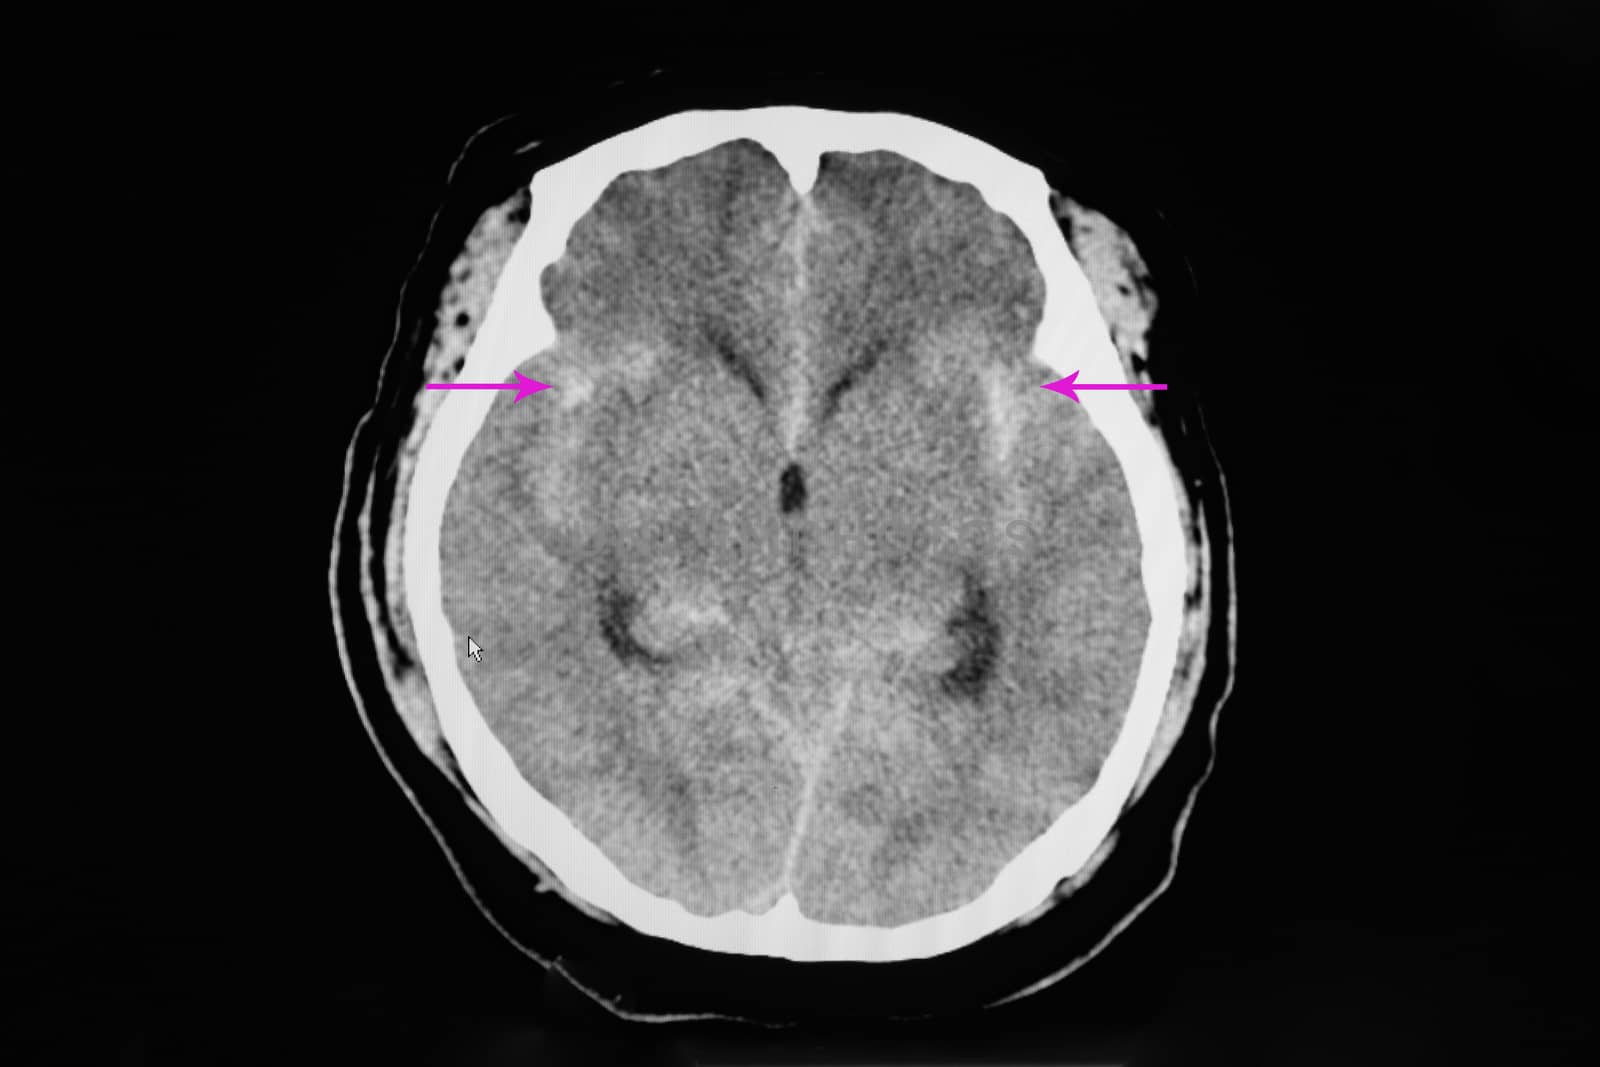 CT brain scan of a patient with tramatic brain injury showing intracerebral hemorrhage patches